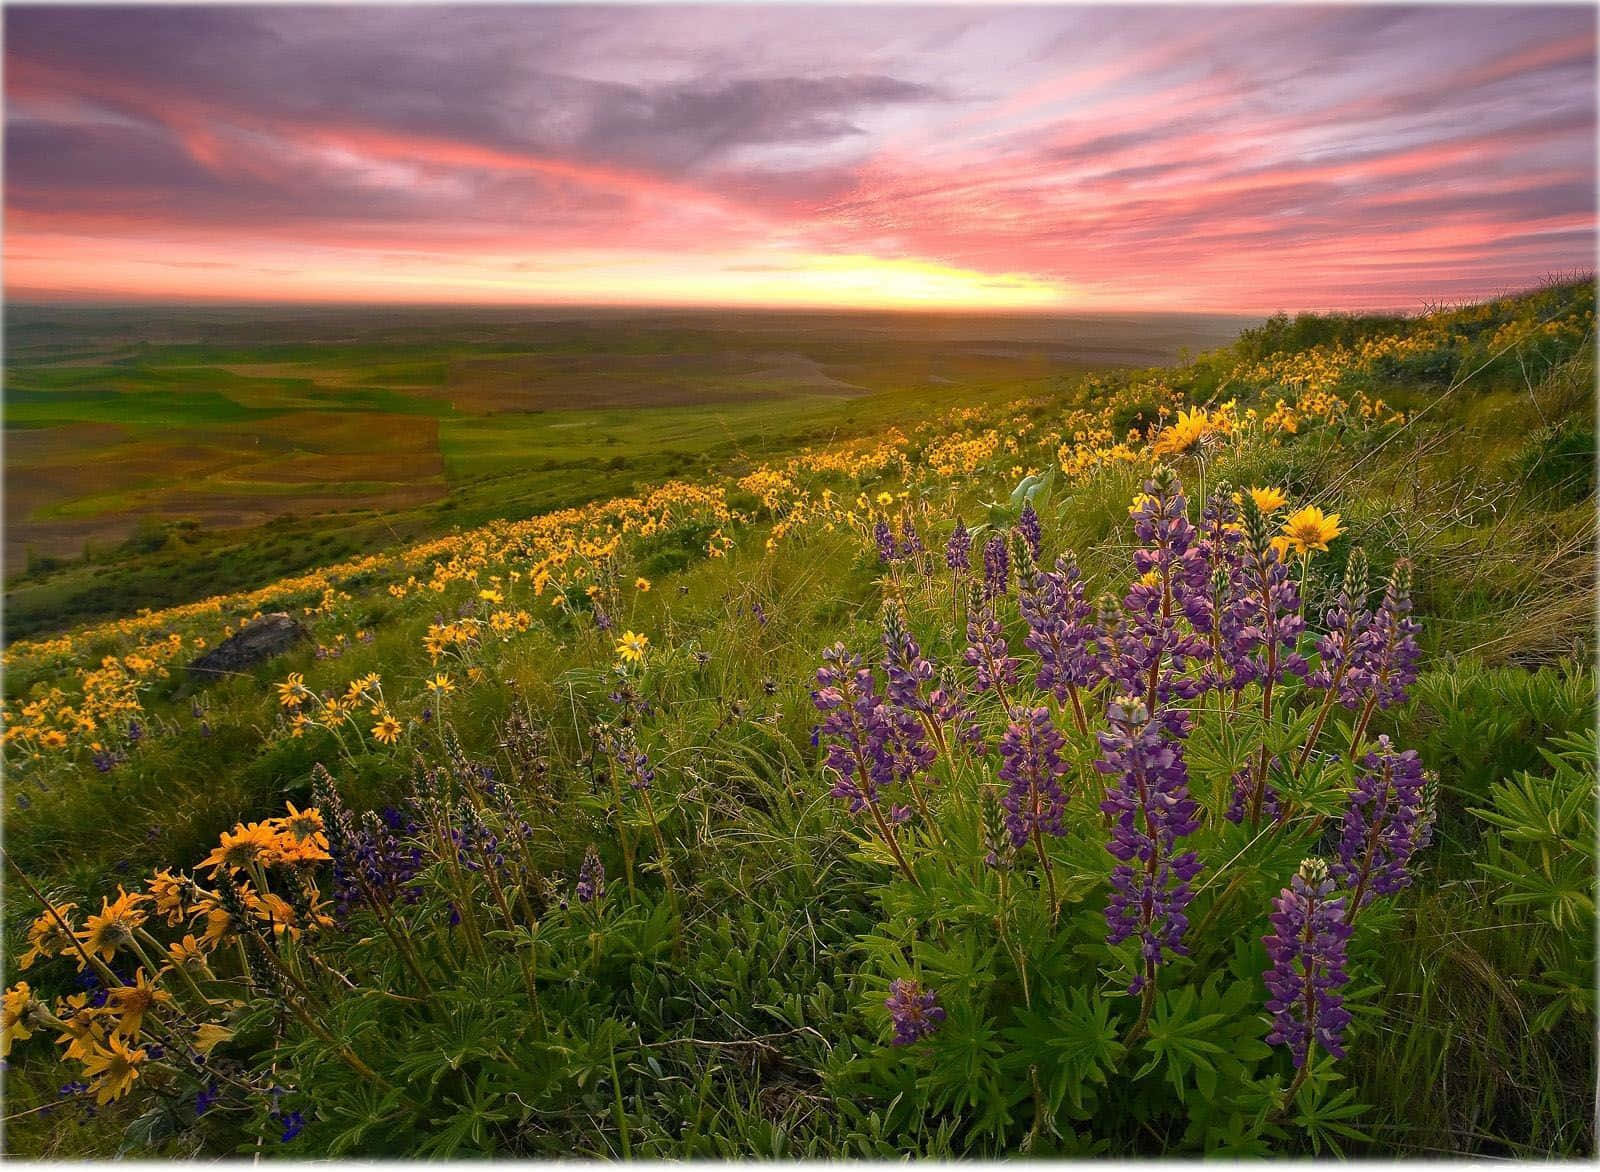 lupine flowers in the field at sunset